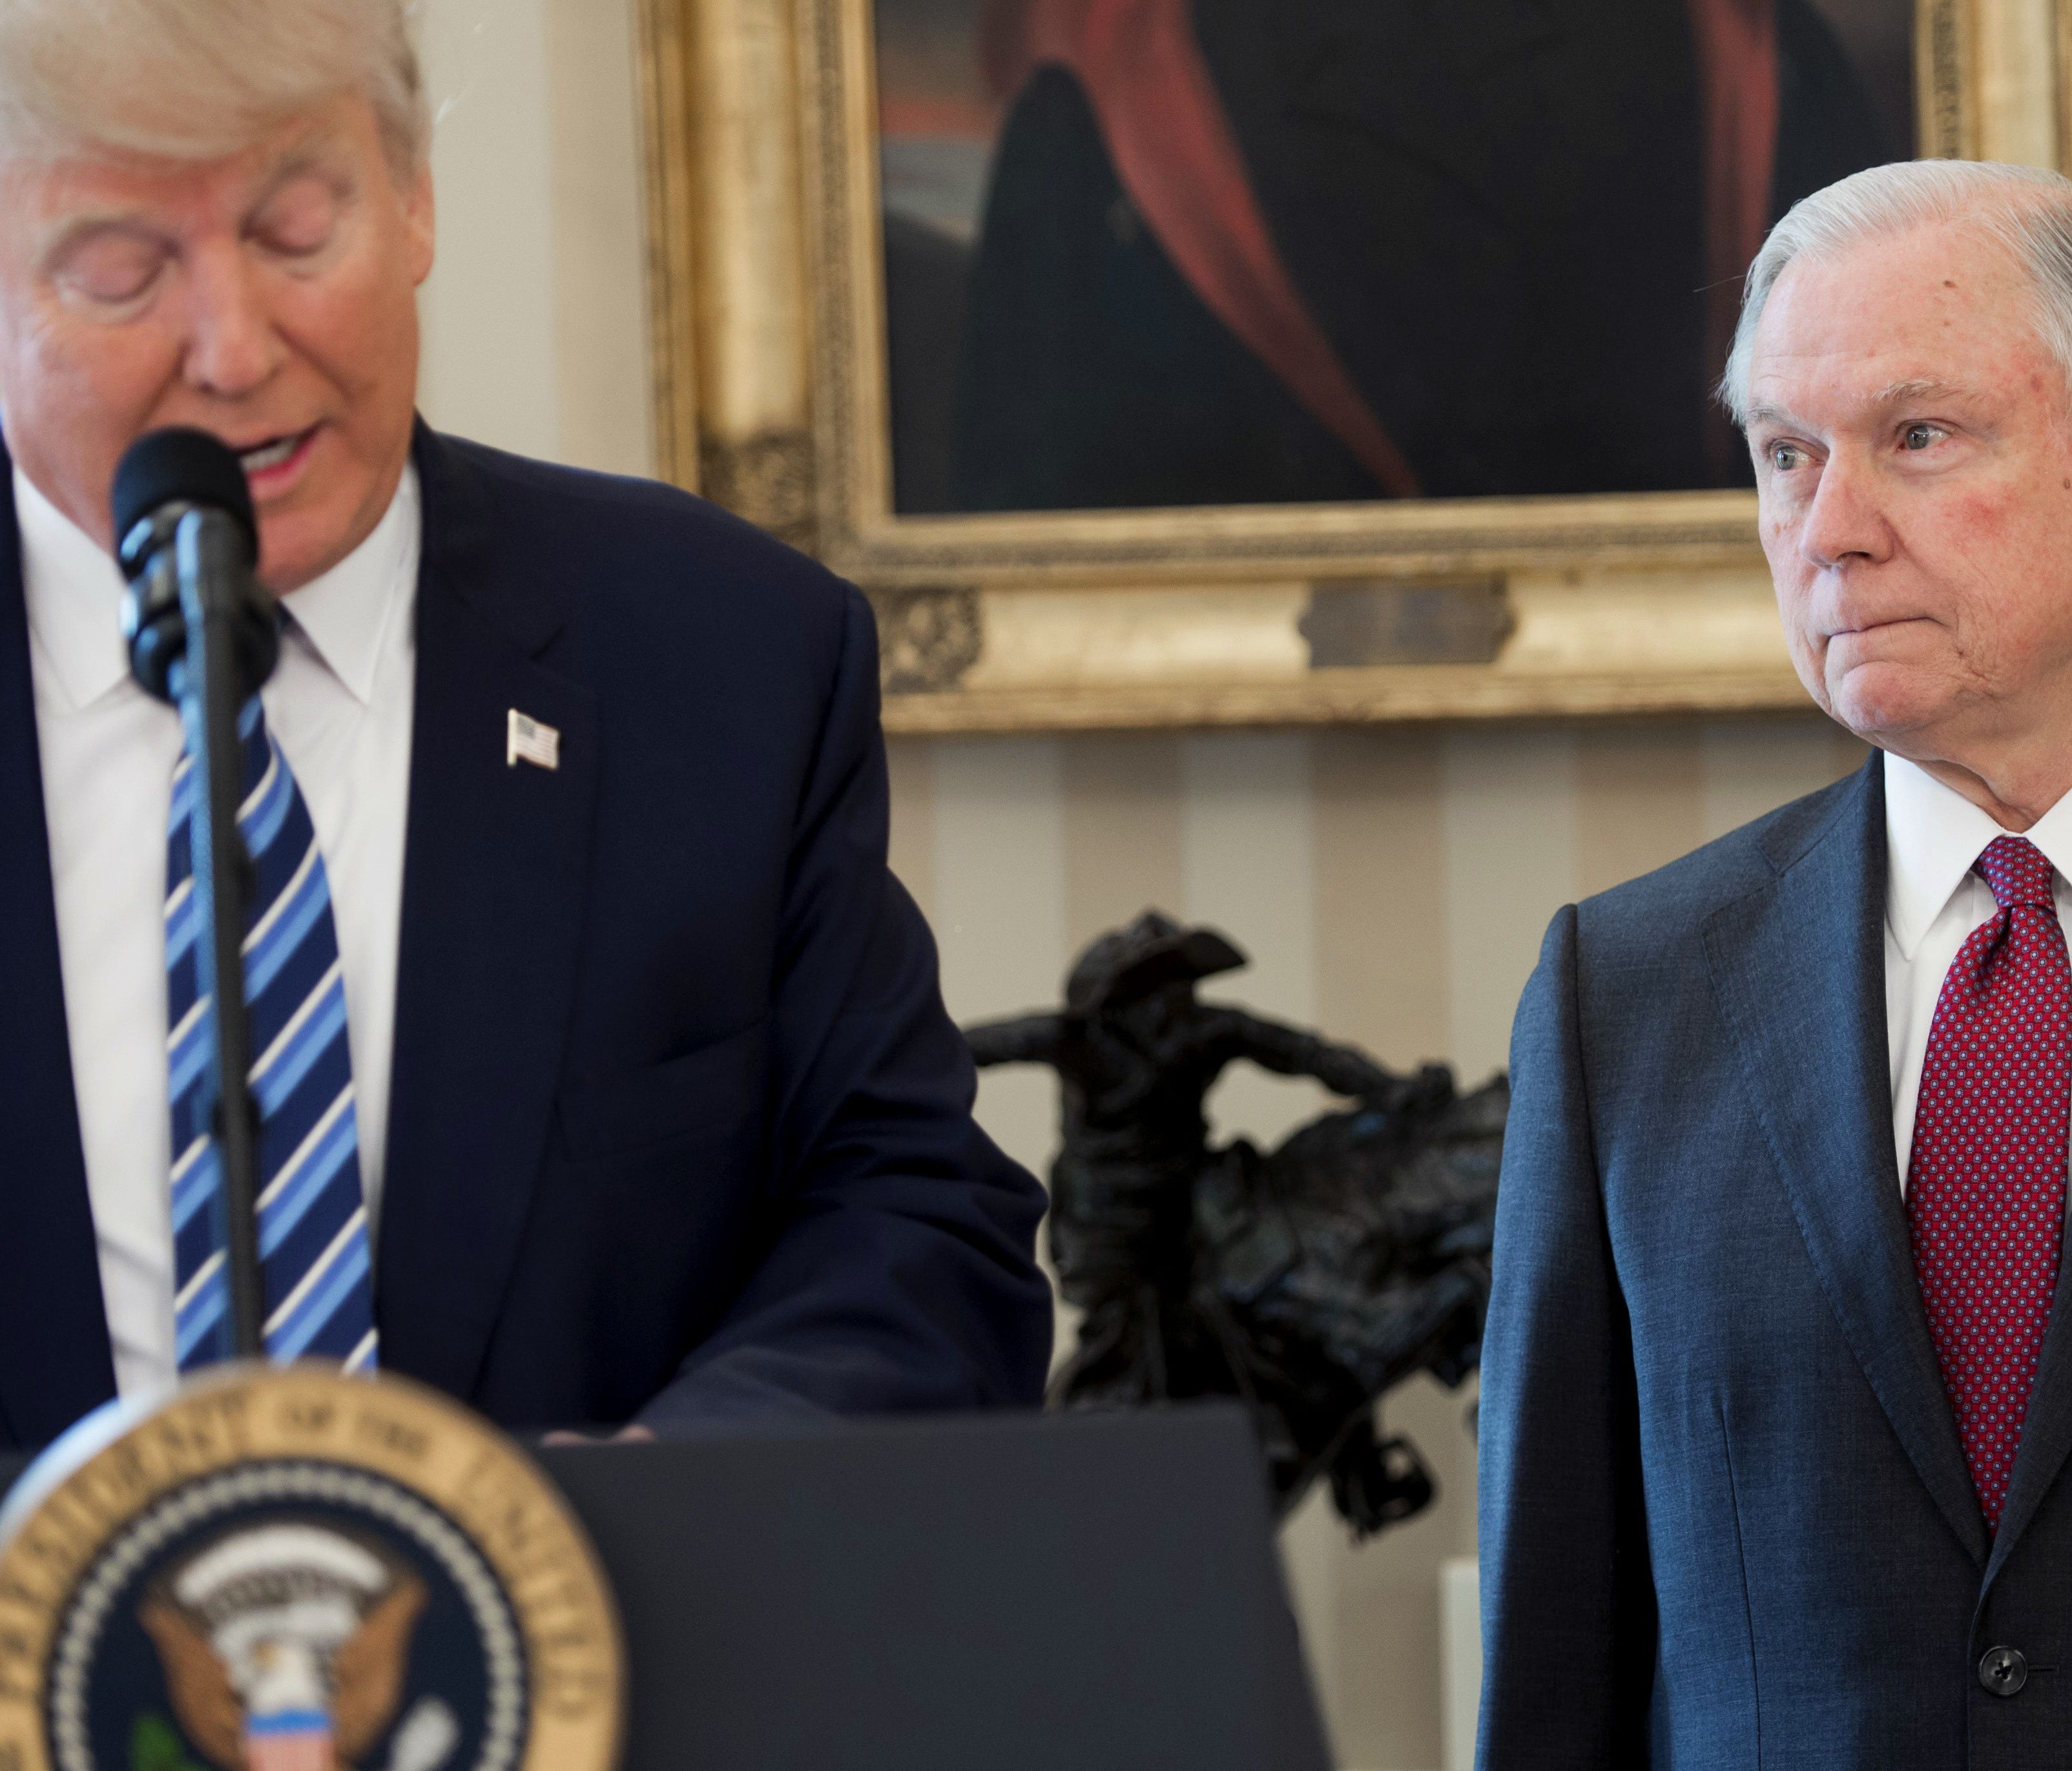 President Trump and Attorney General Jeff Sessions.